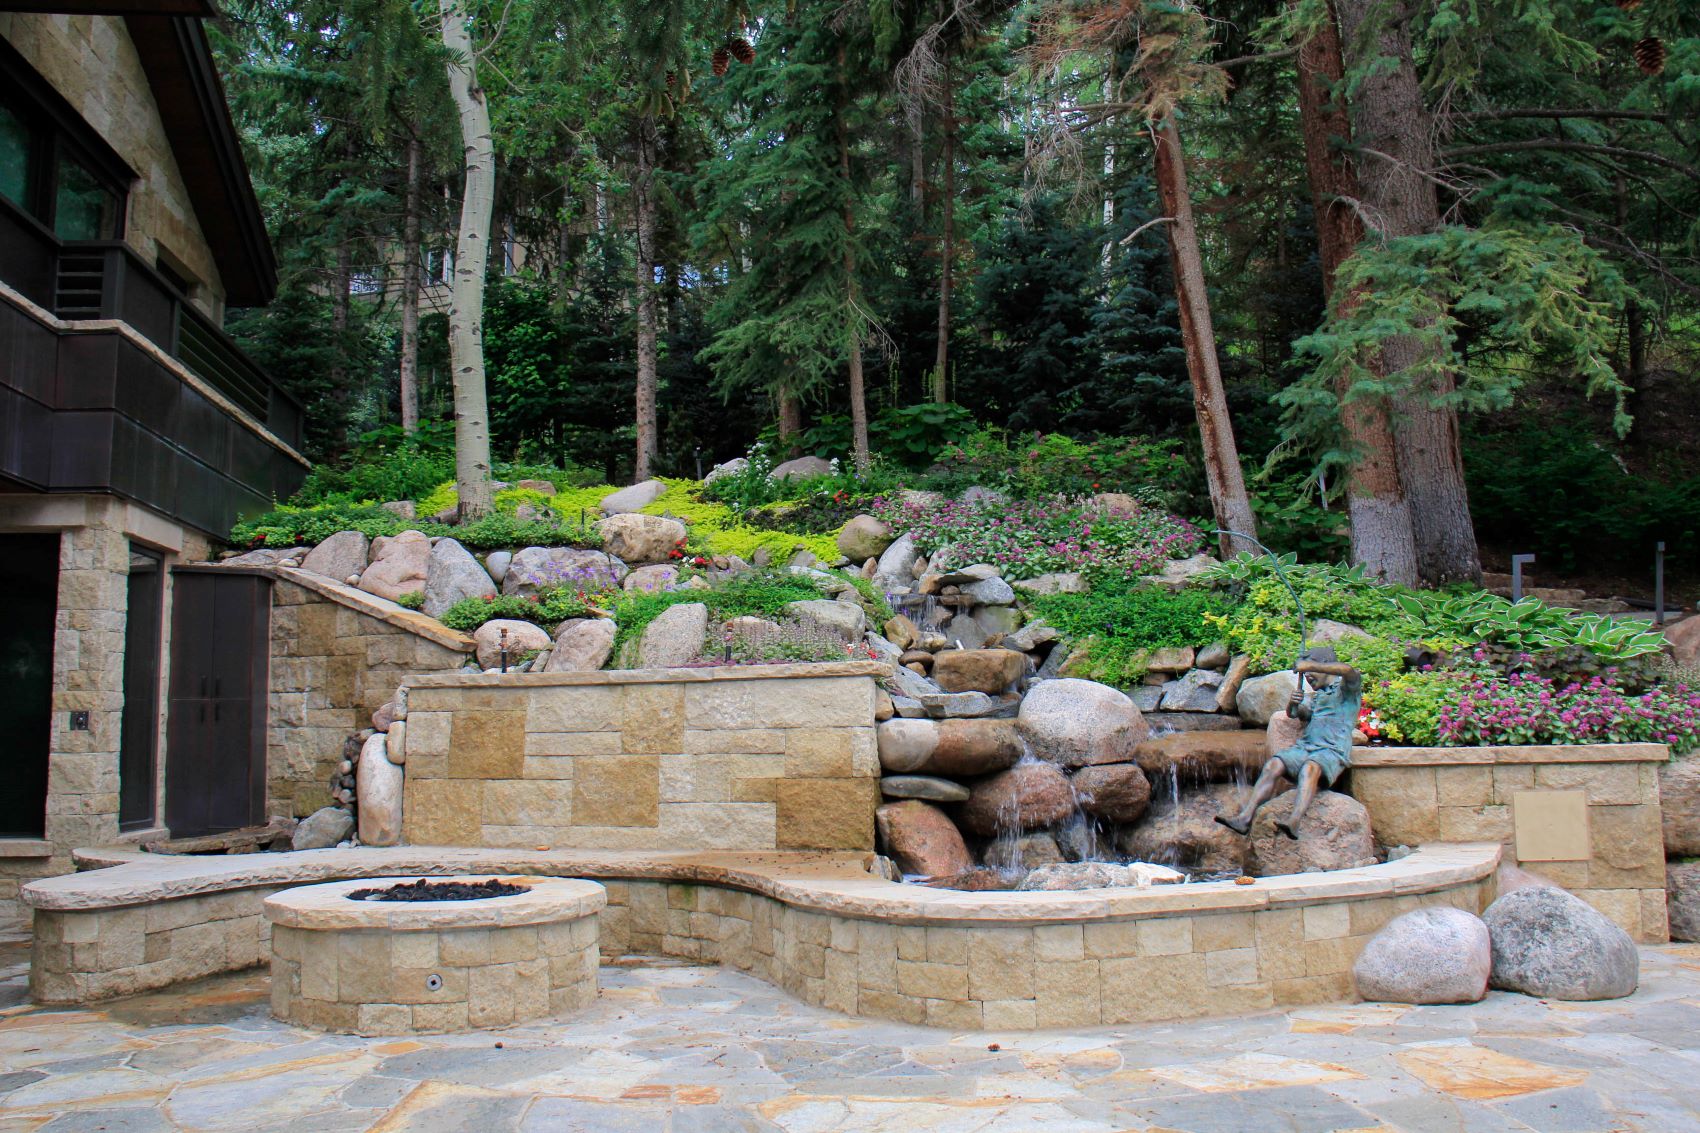 This image features a landscaped garden with a stone fire pit, a bench, and a small waterfall amidst boulders and lush plants, next to a building.